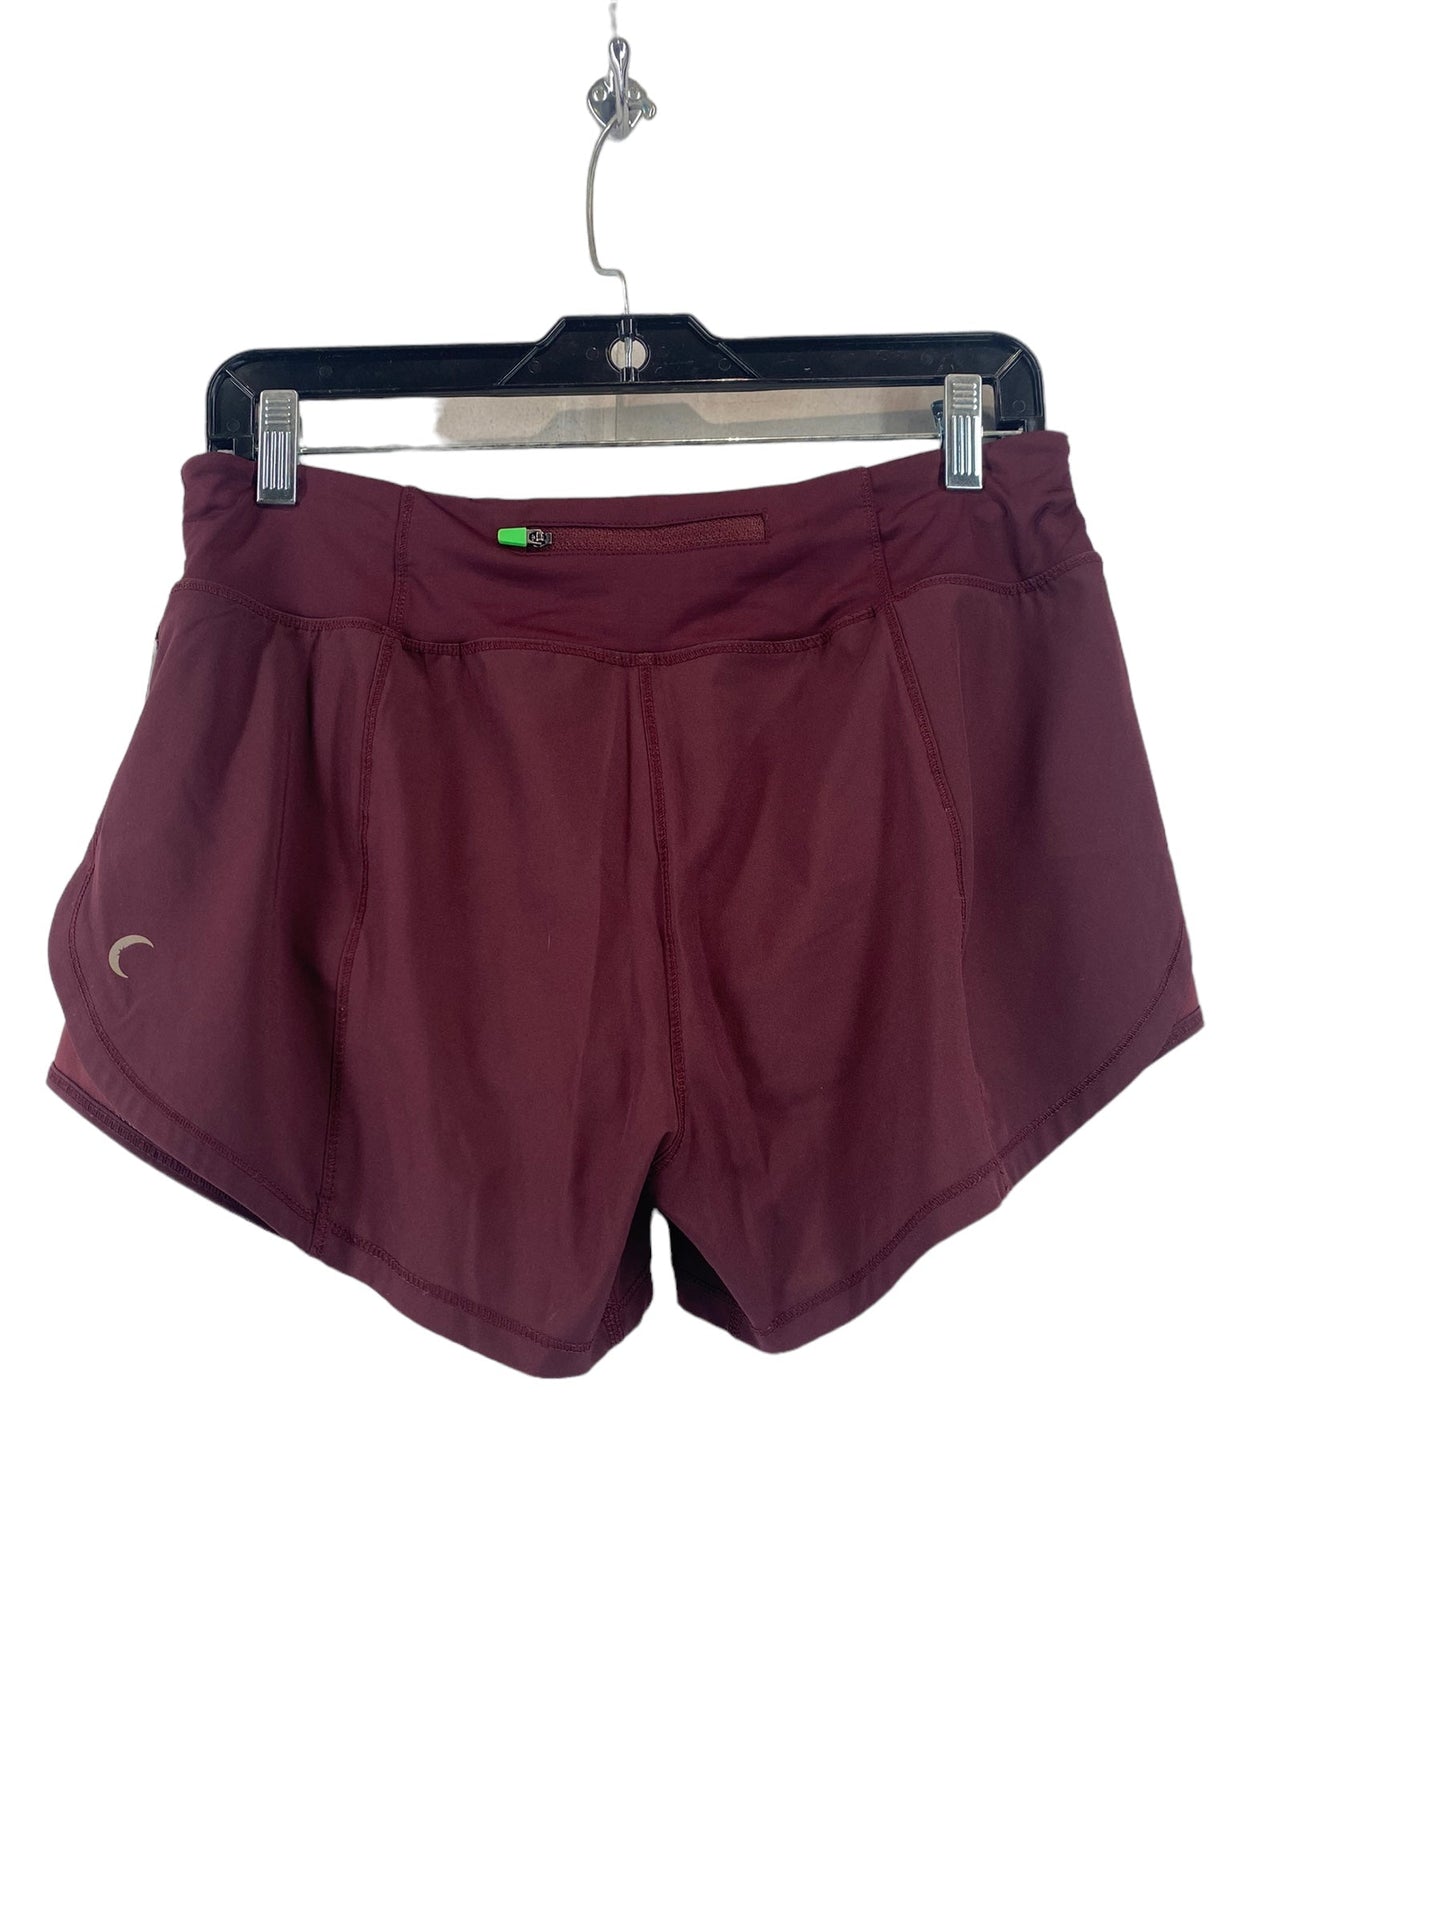 Athletic Shorts By Zyia  Size: S